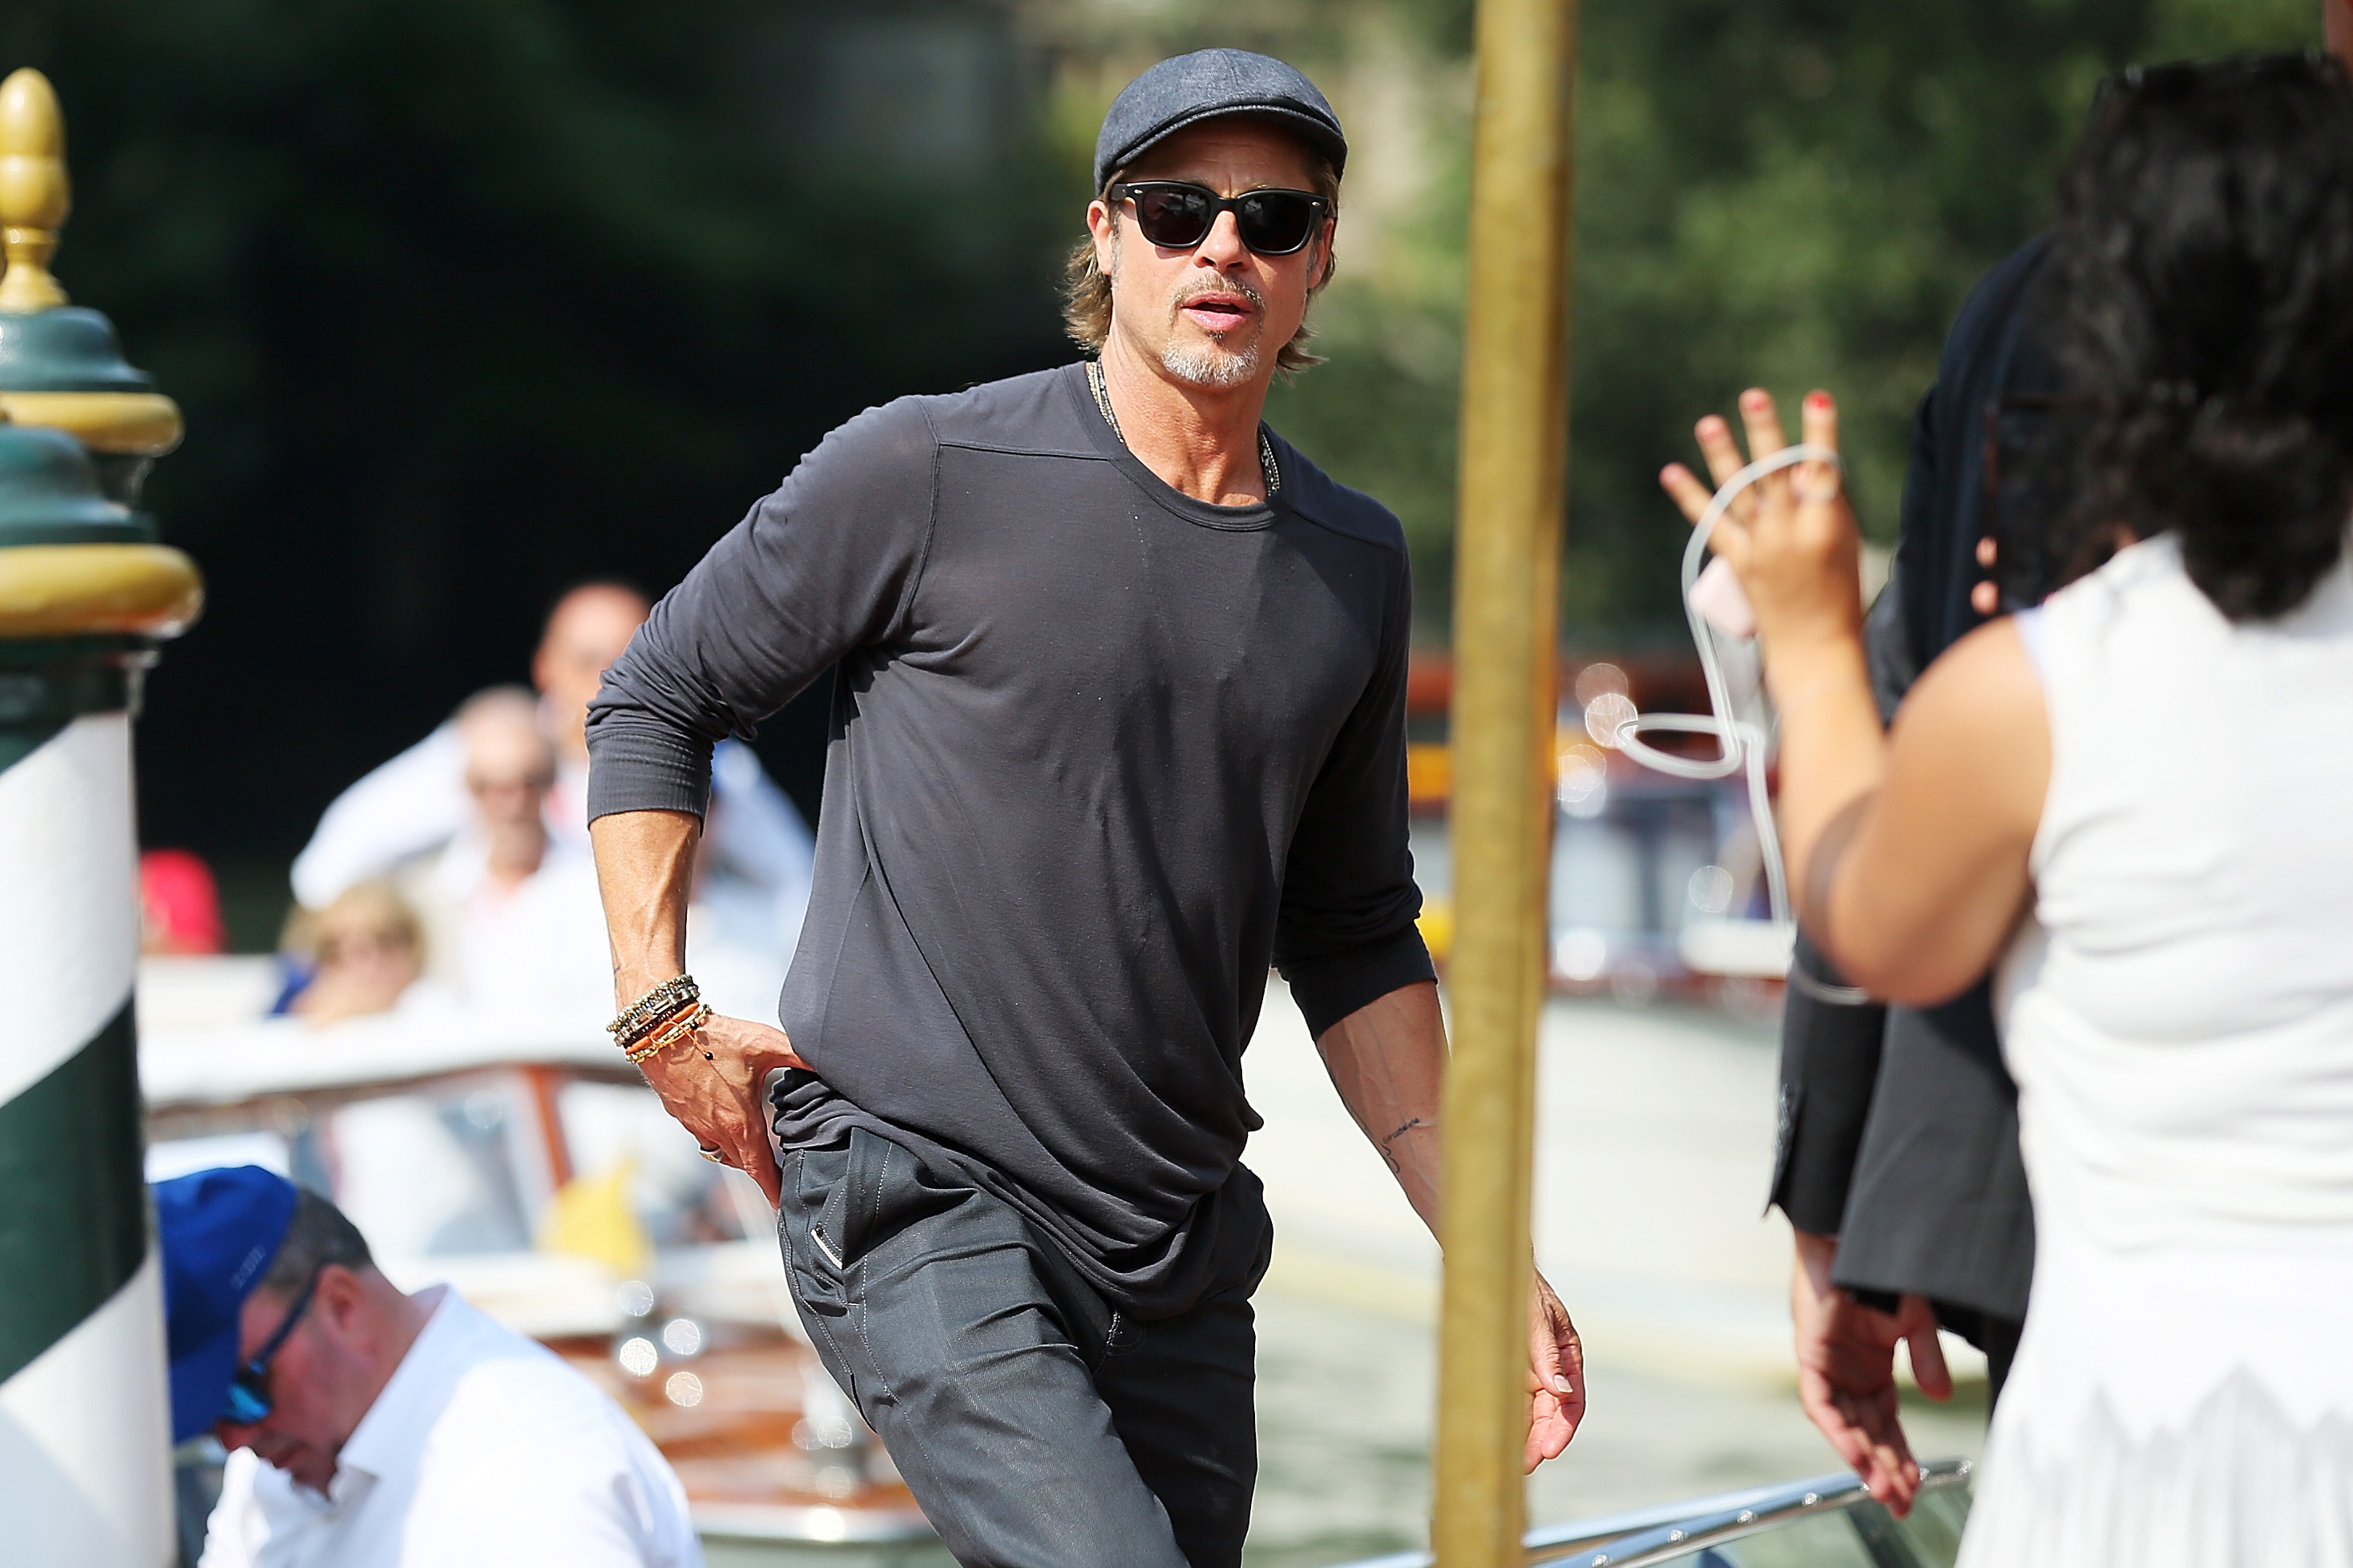 Brad Pitt at the 2019 Venice Film Festival | Source: Getty Images